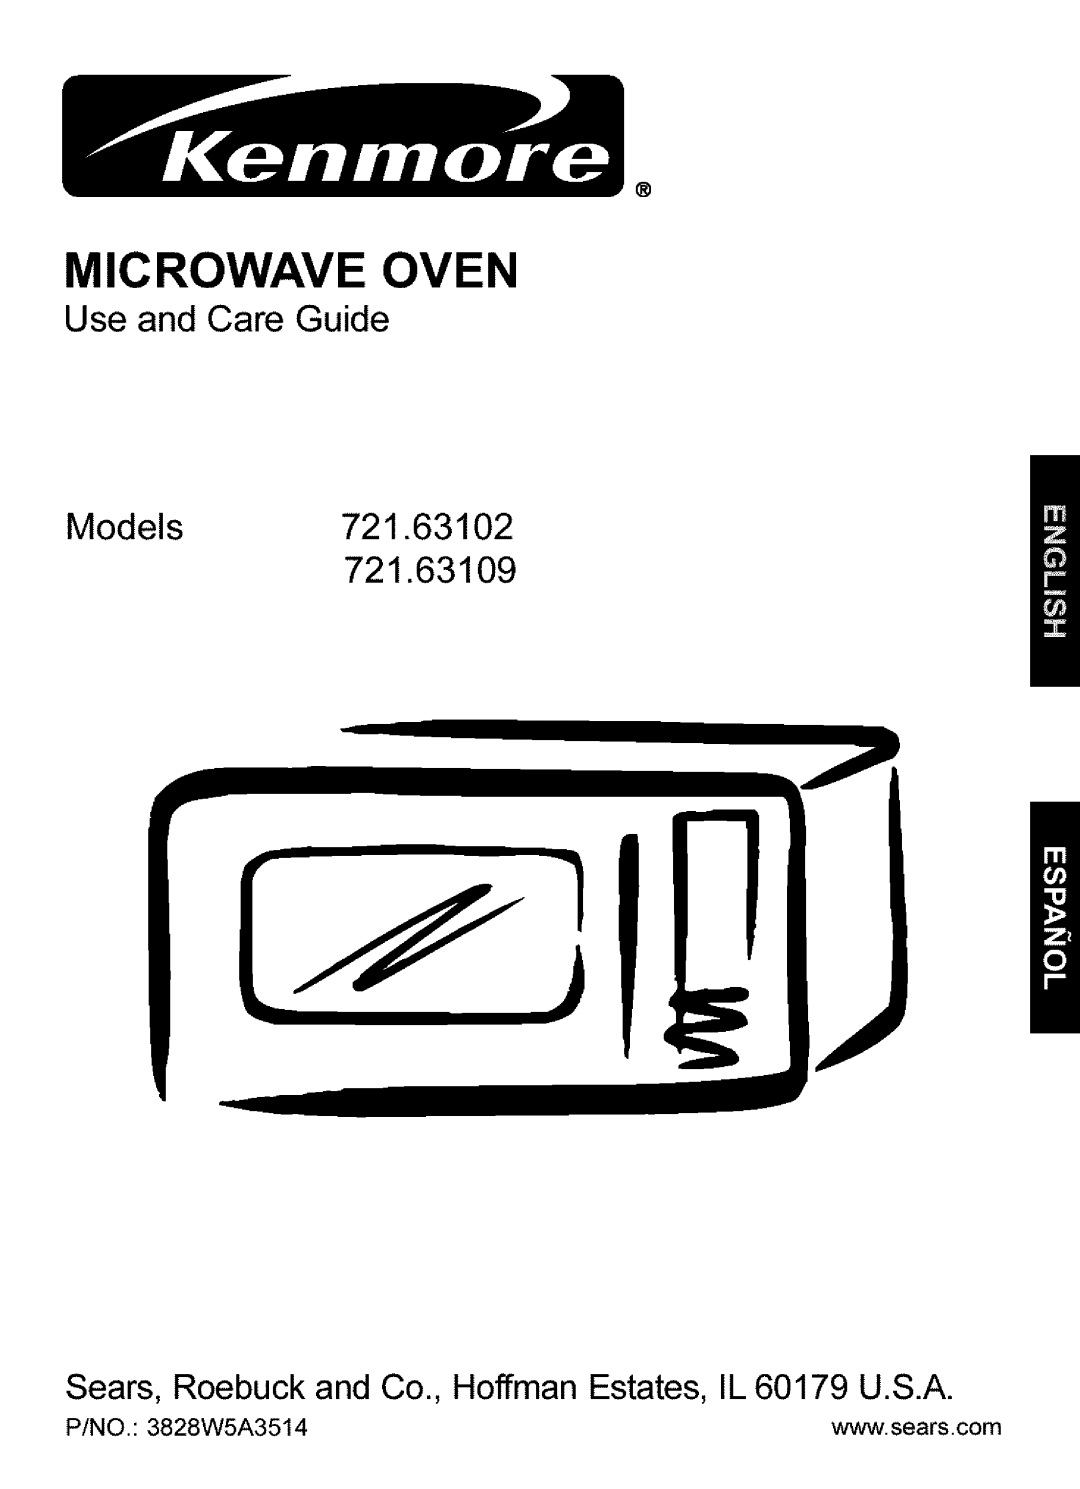 Kenmore 721.63109 manual Microwave Oven, Models721.63102, Use and Care Guide, P/NO.: 3828W5A3514 